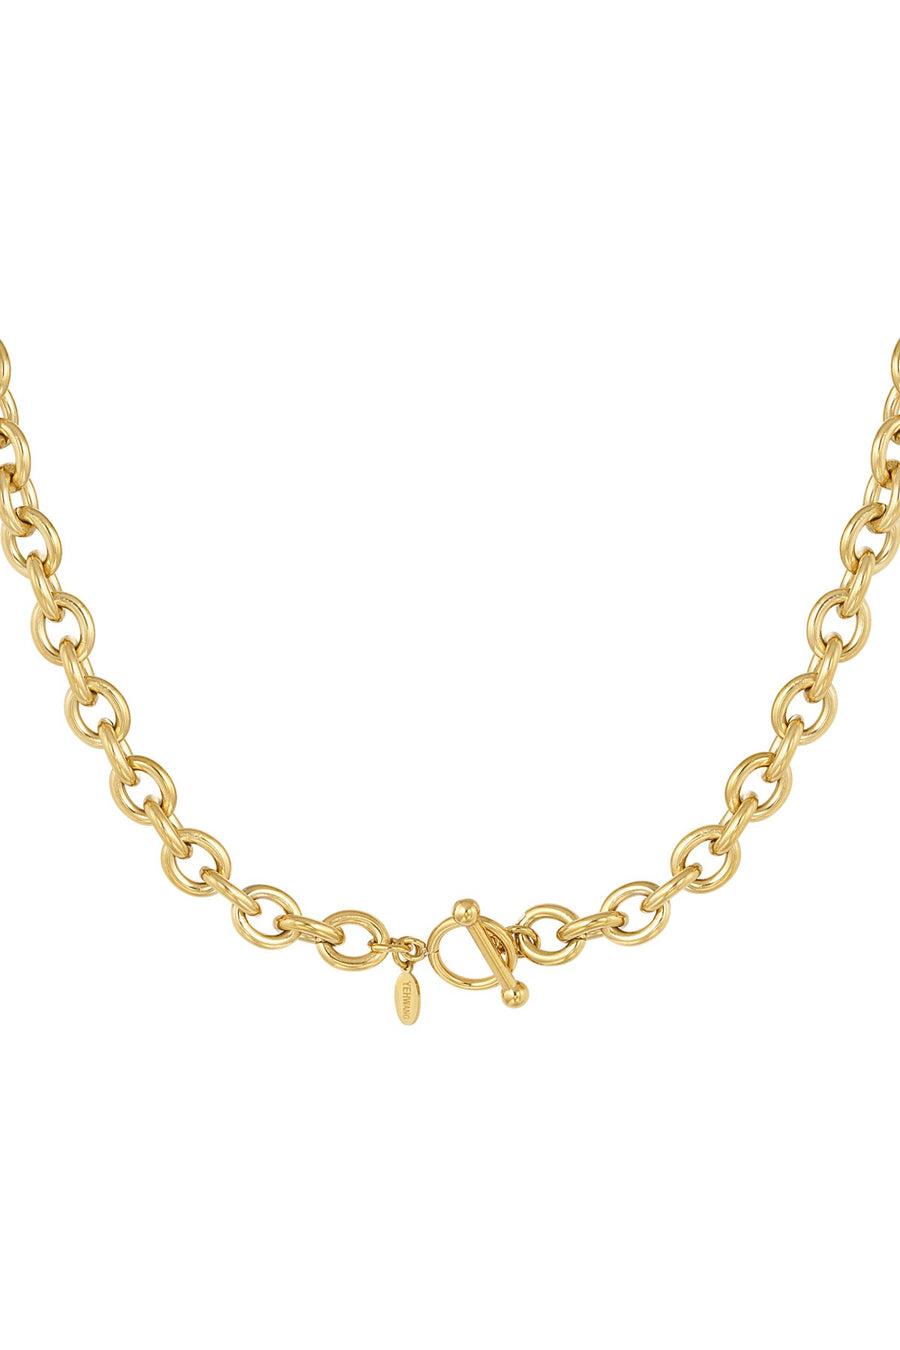 T- Bar Link Chain - Gold & Silver Available